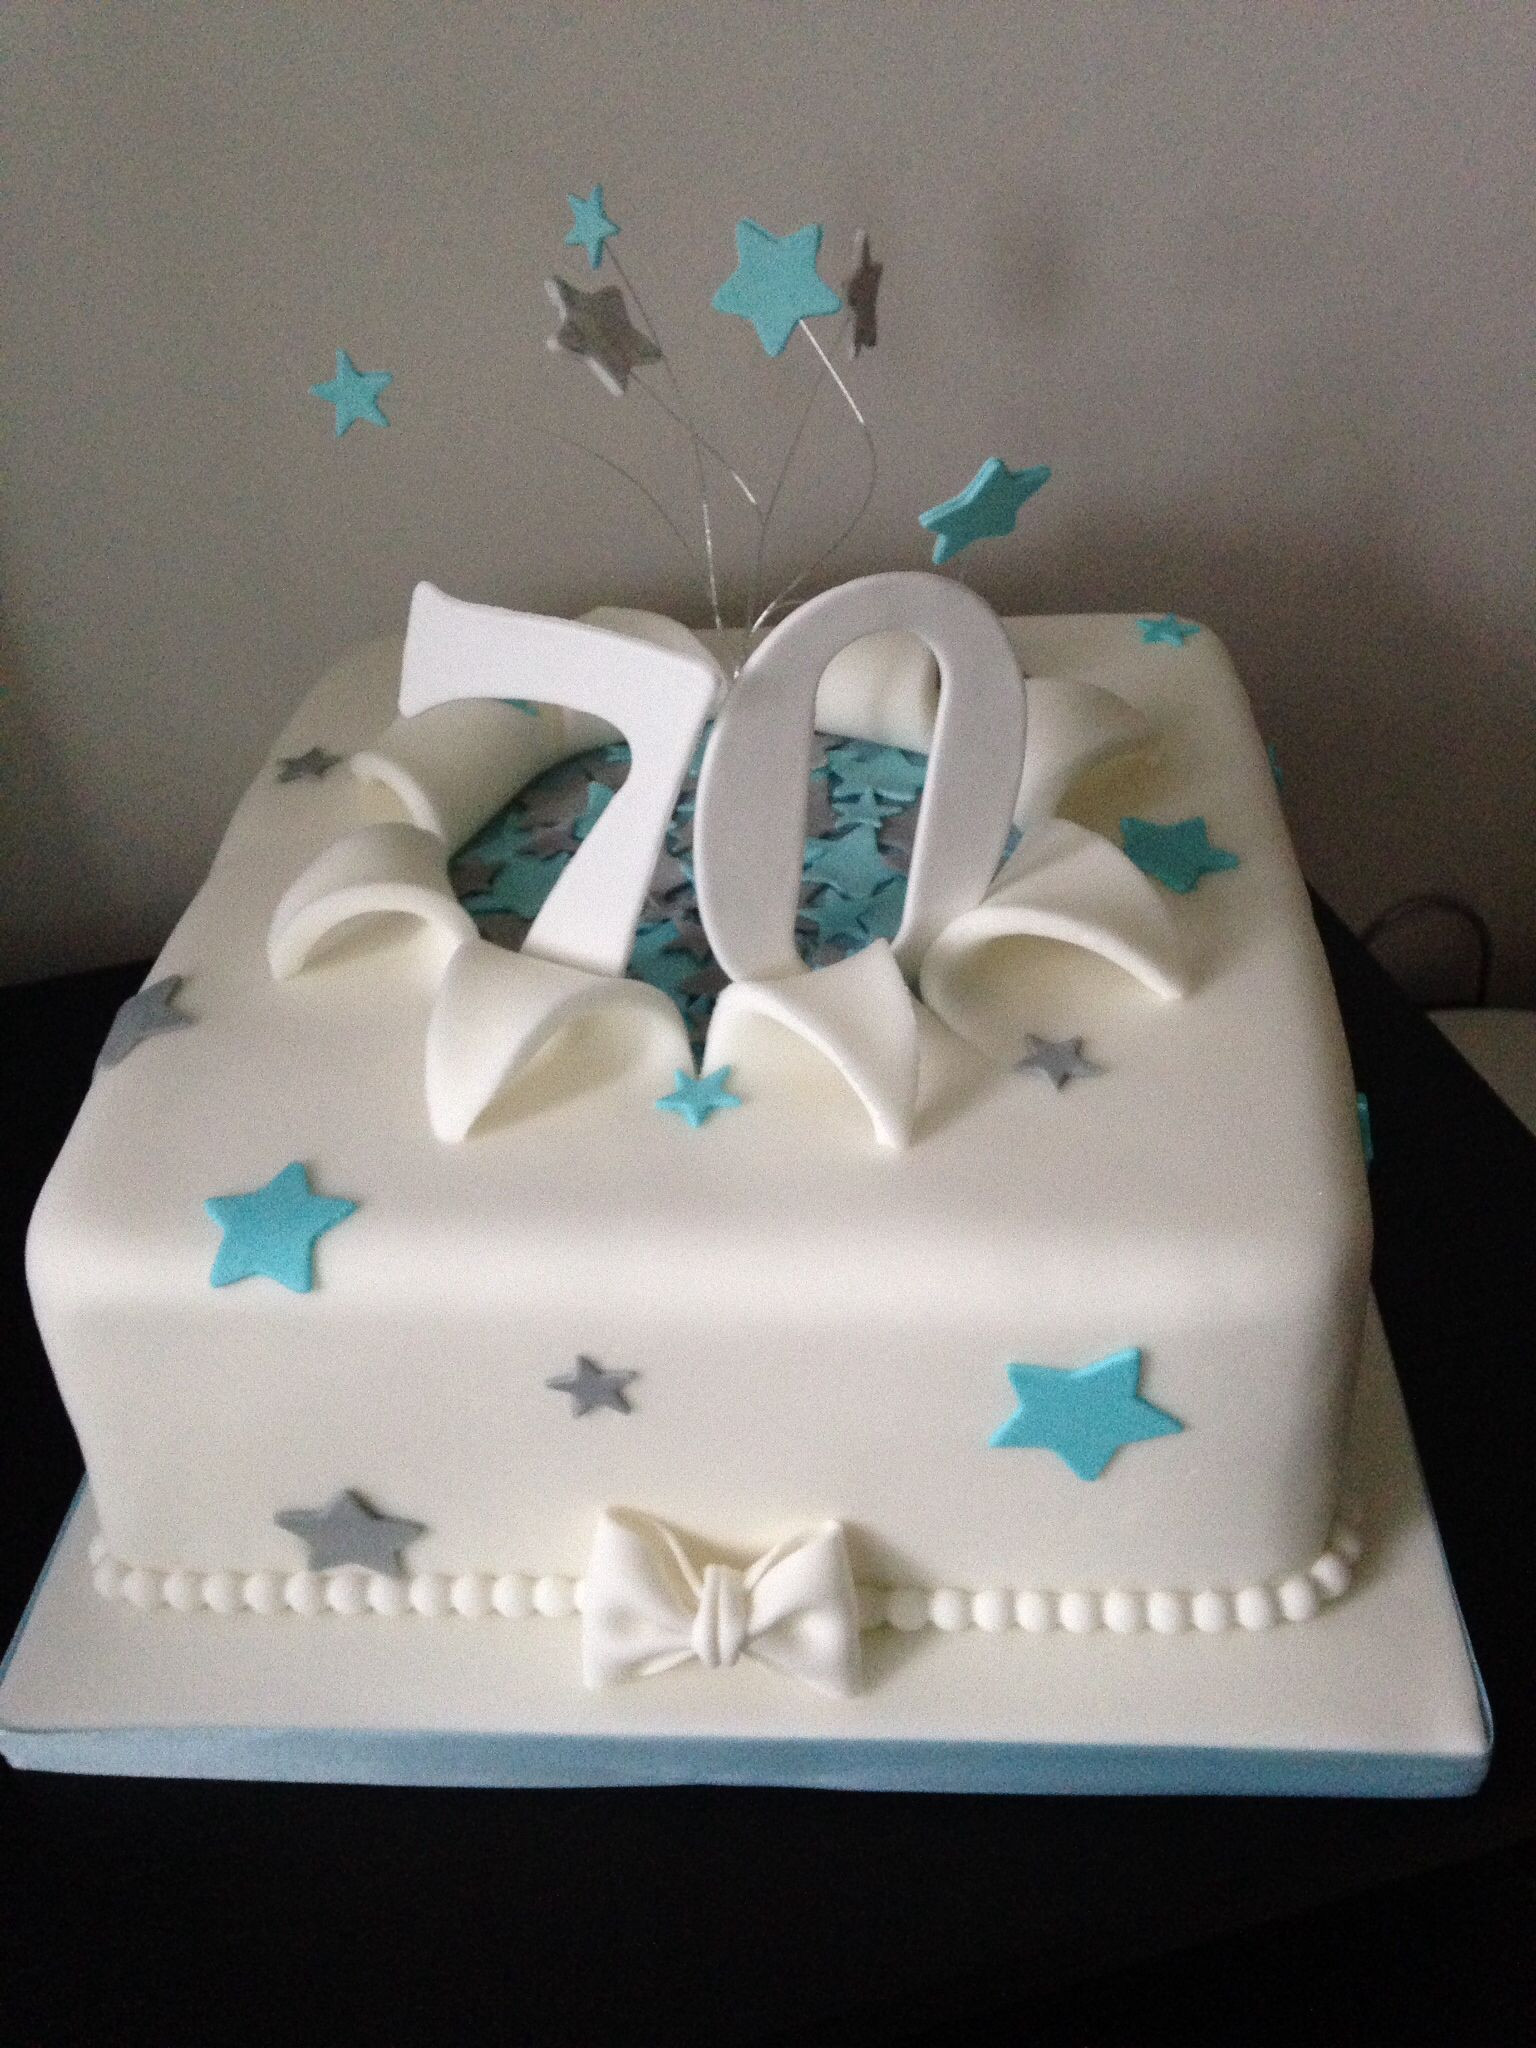 70Th Birthday Cake Ideas For Dad
 70th birthday cake in turquoise and silver Cakes